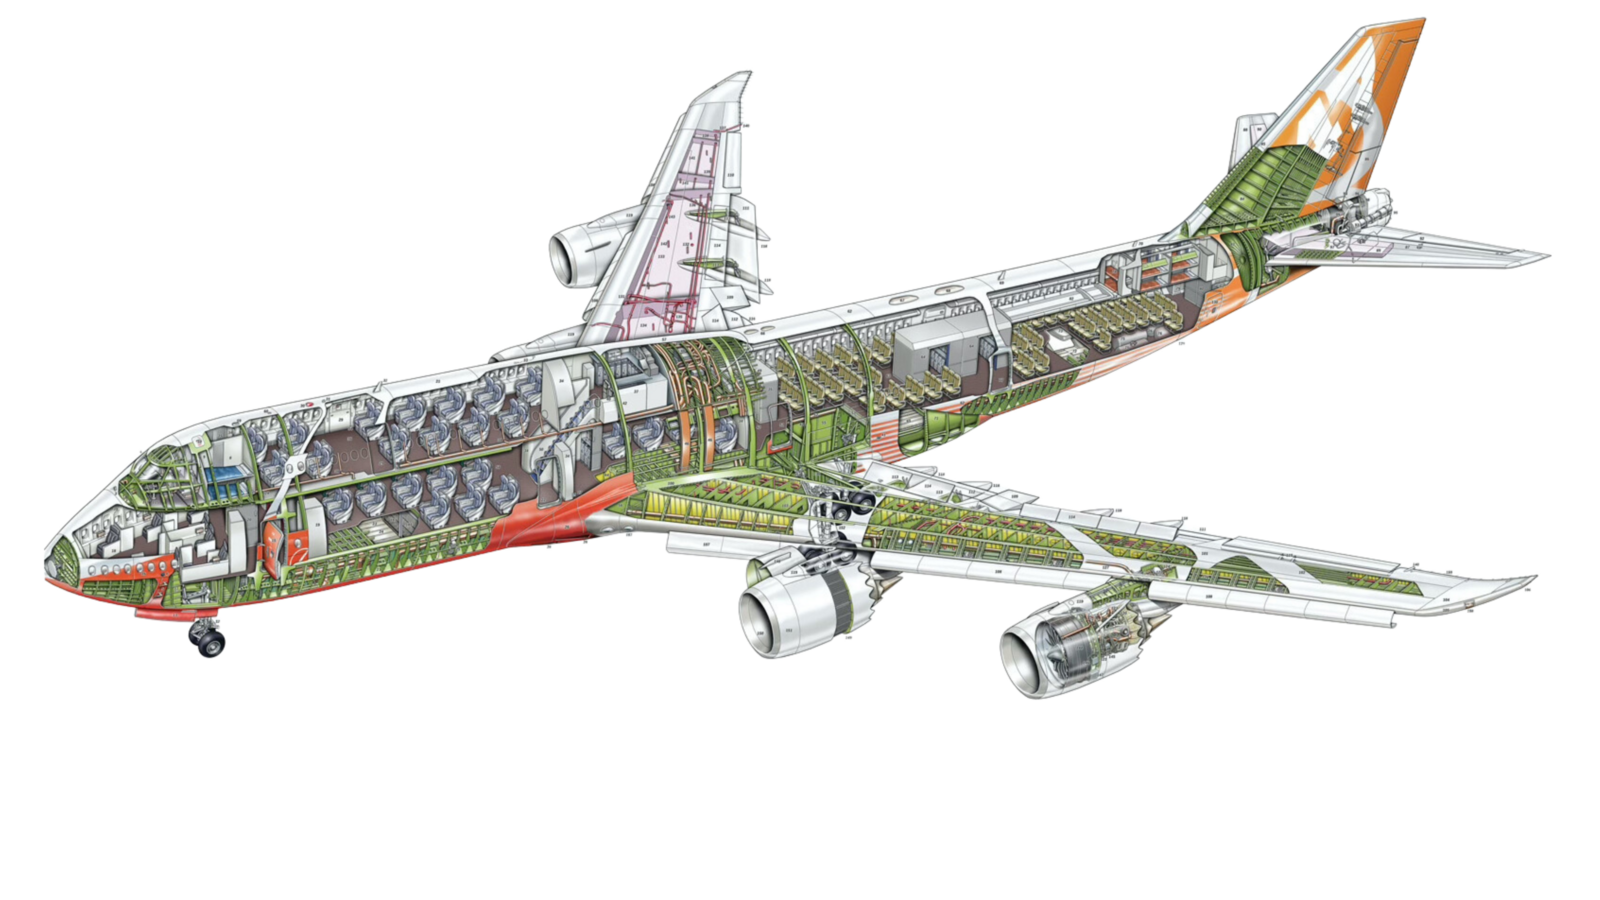 Cutaway Illustration of Airplane showing the interior features